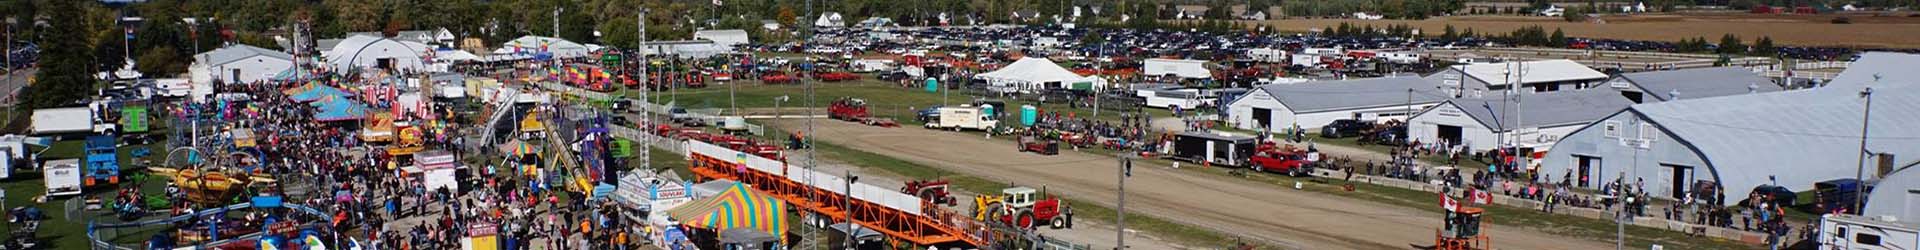 2018 Fair Exhibit Entry Deadline (Without Late Fees)